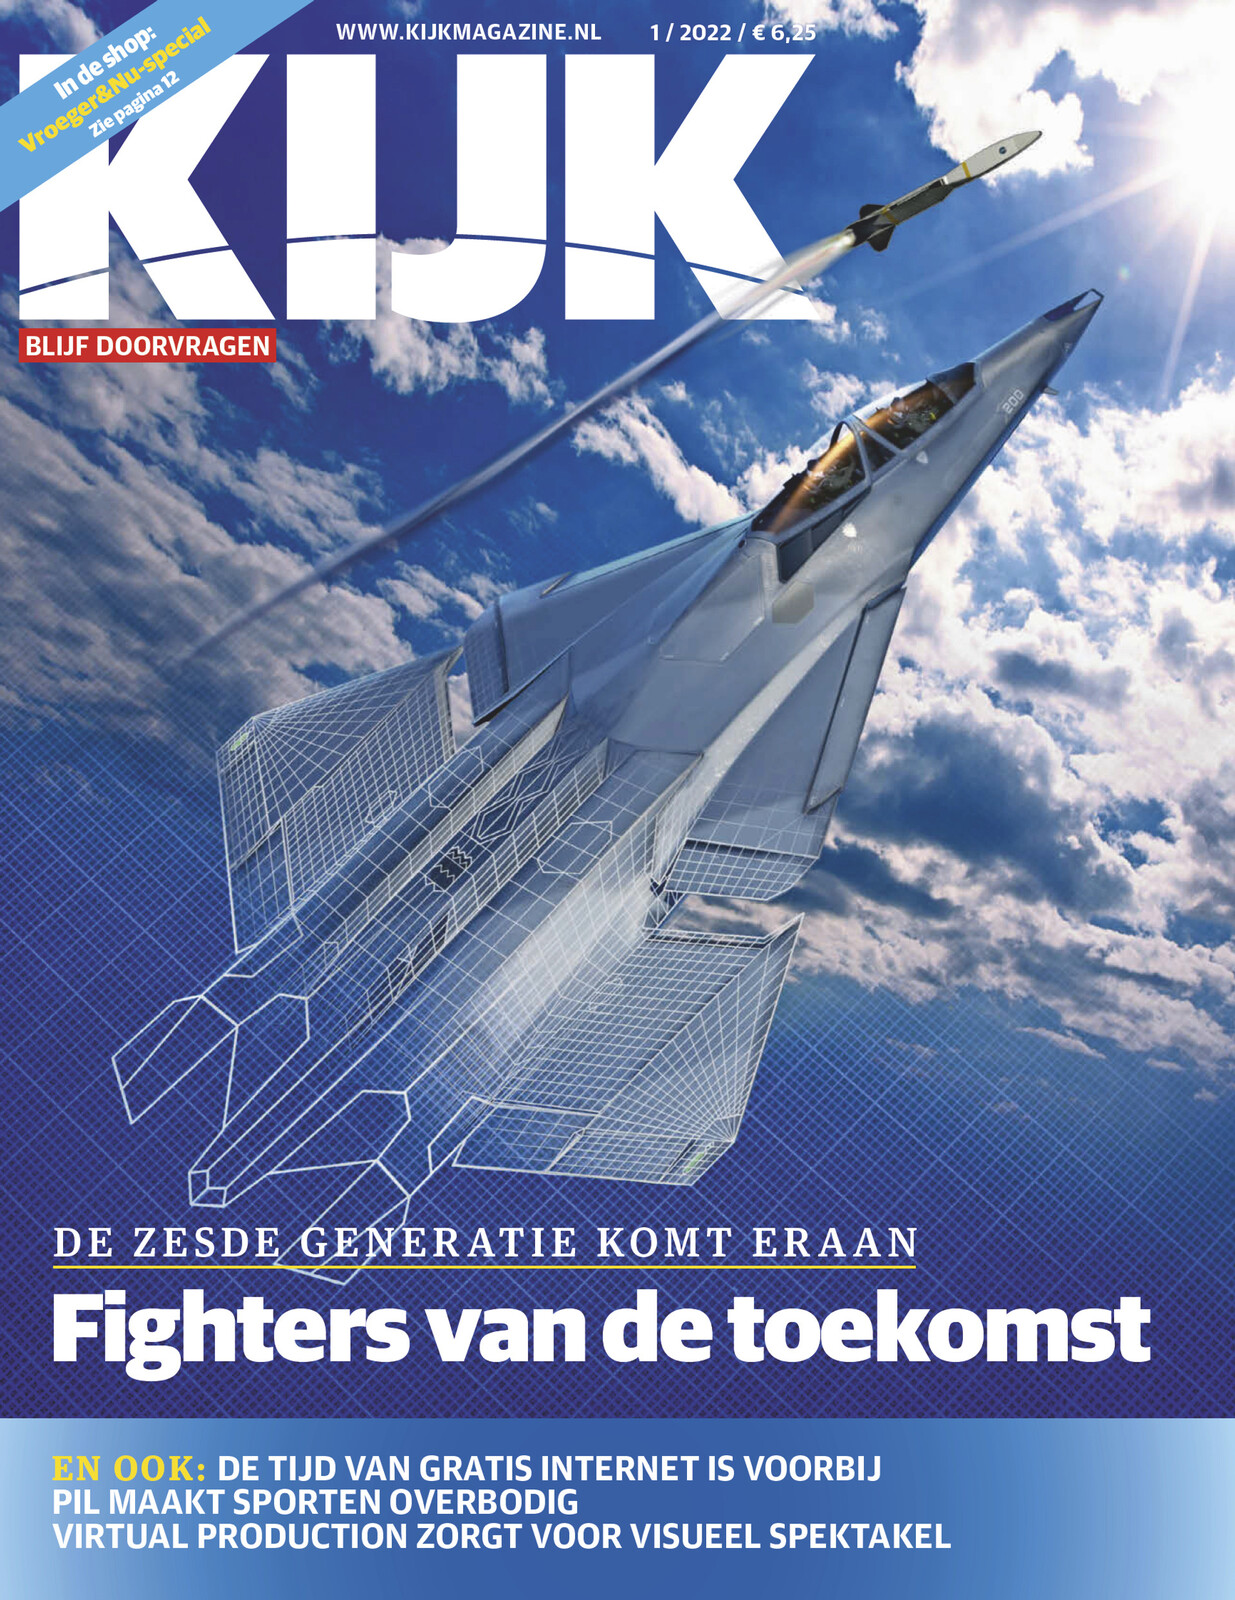 Killswitch on the cover of KIJK magazine.